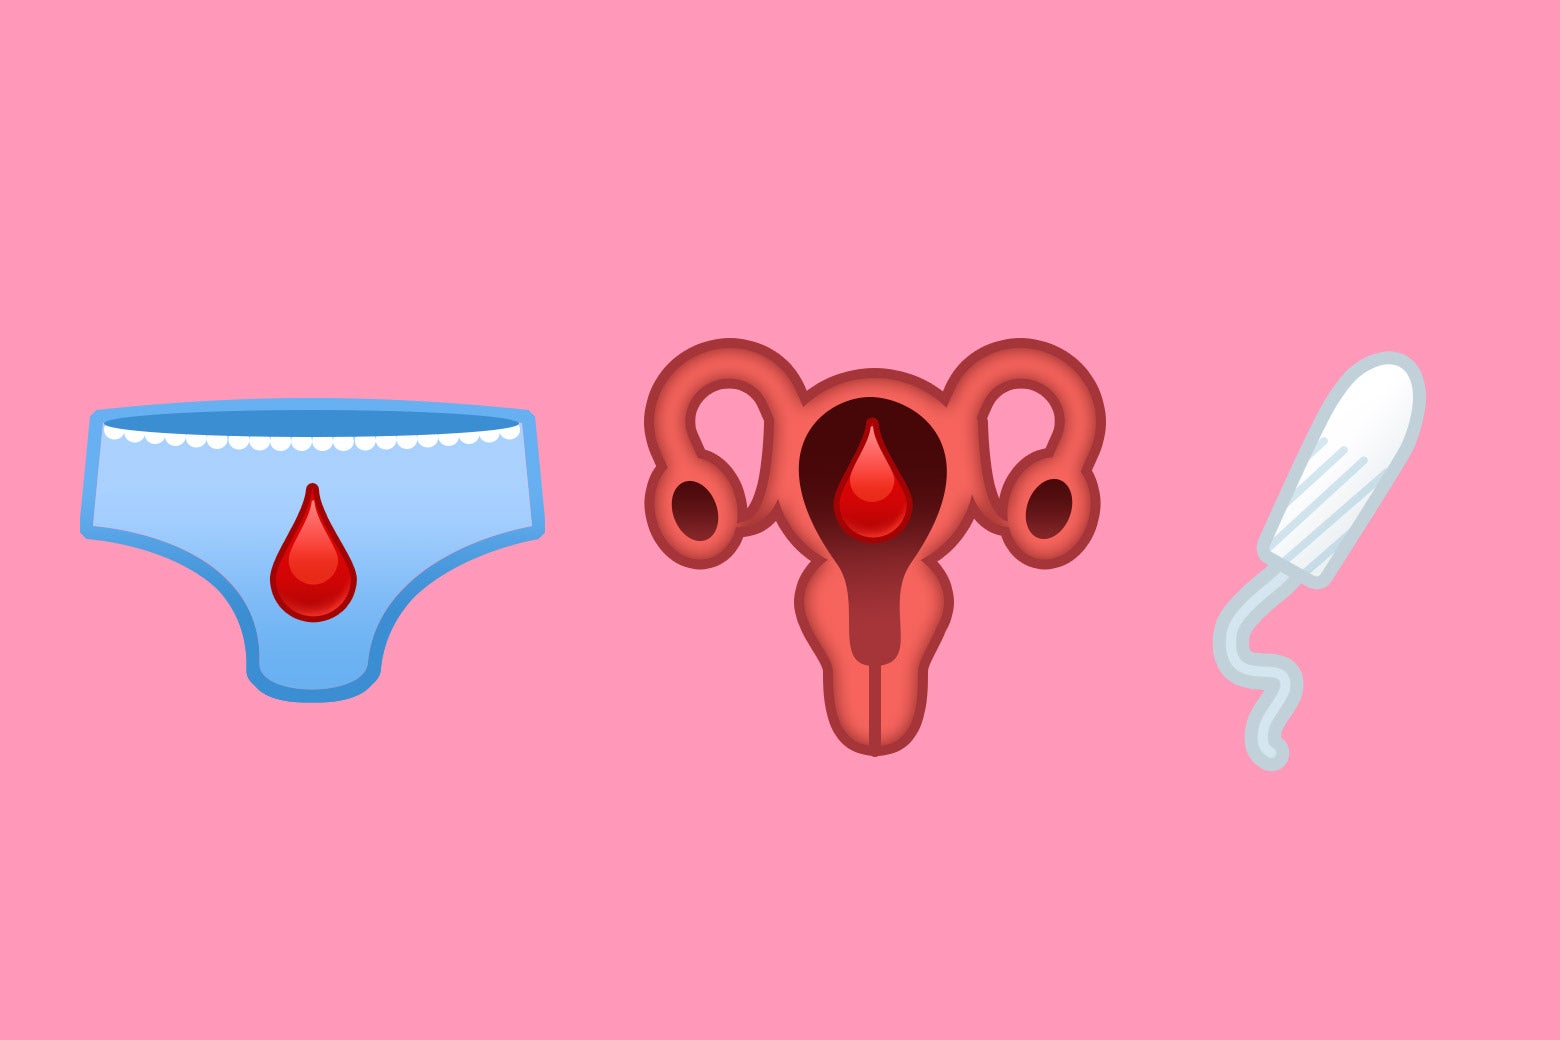 A pair of period panties, an angry uterus, a tampon.